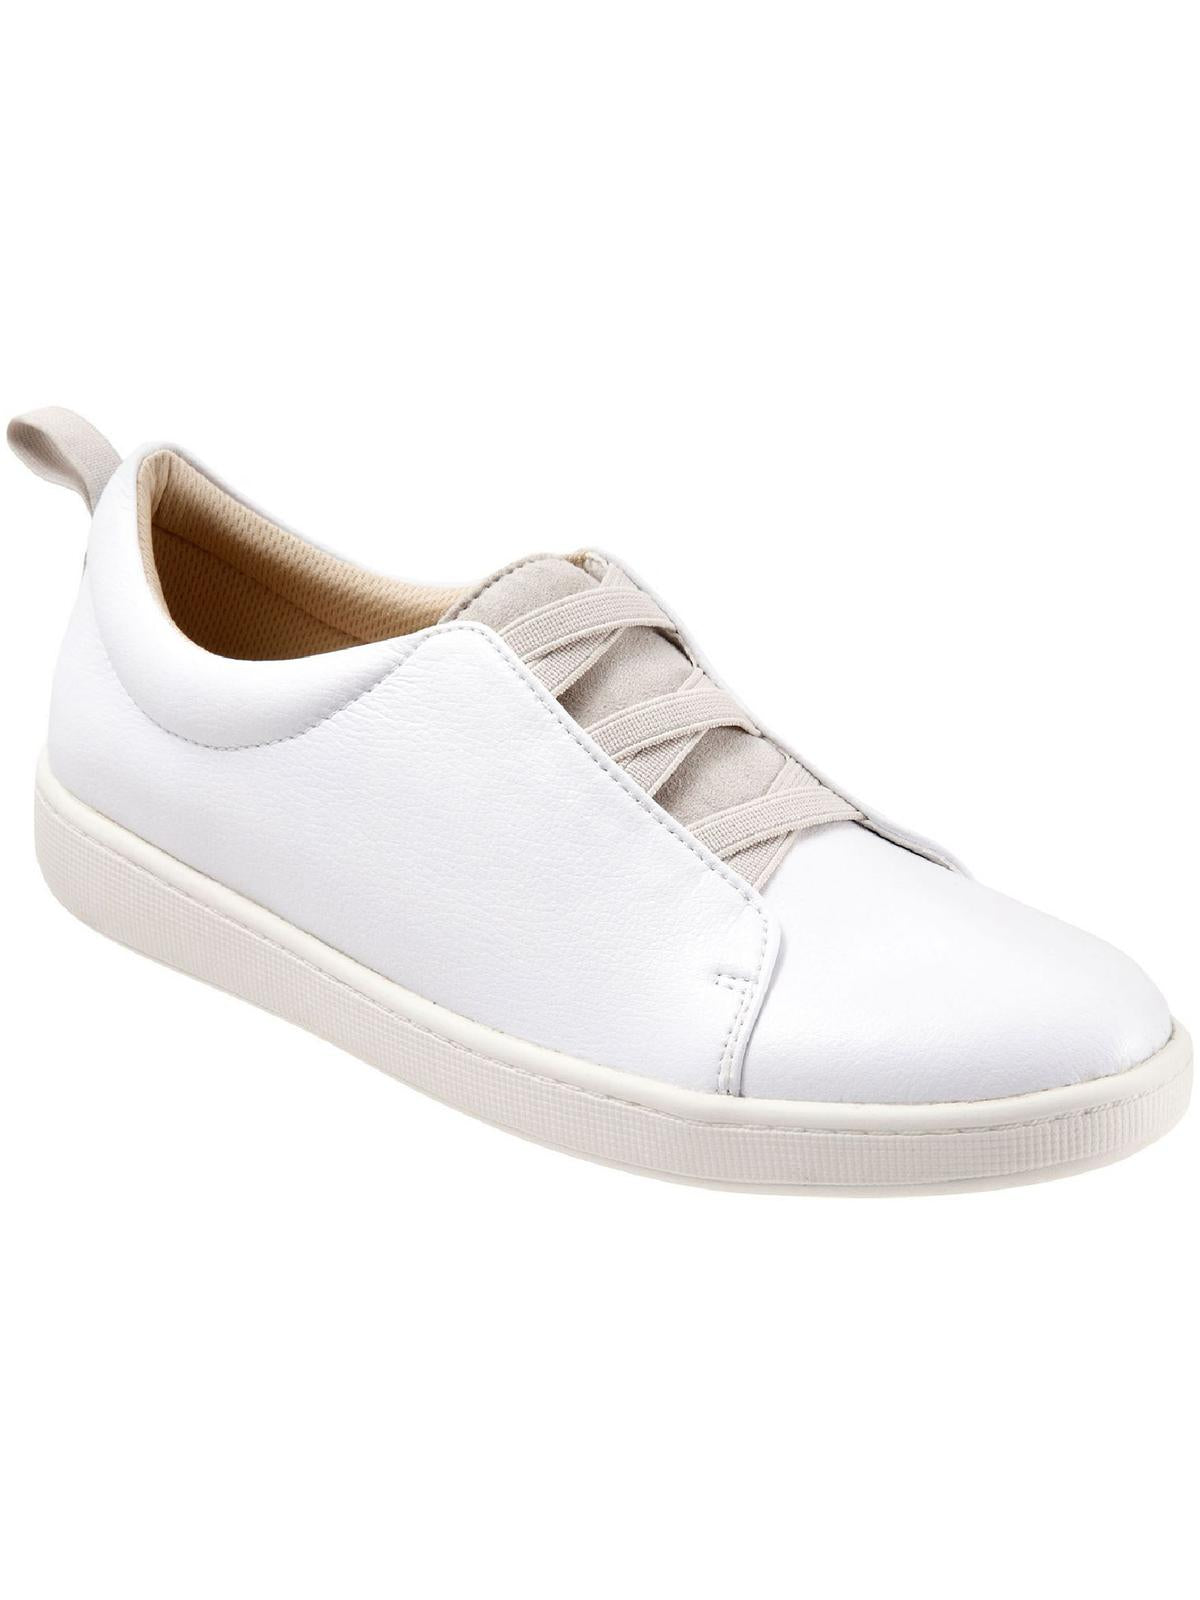 TROTTERS Avrille Womens Leather Slip On Casual and Fashion Sneakers